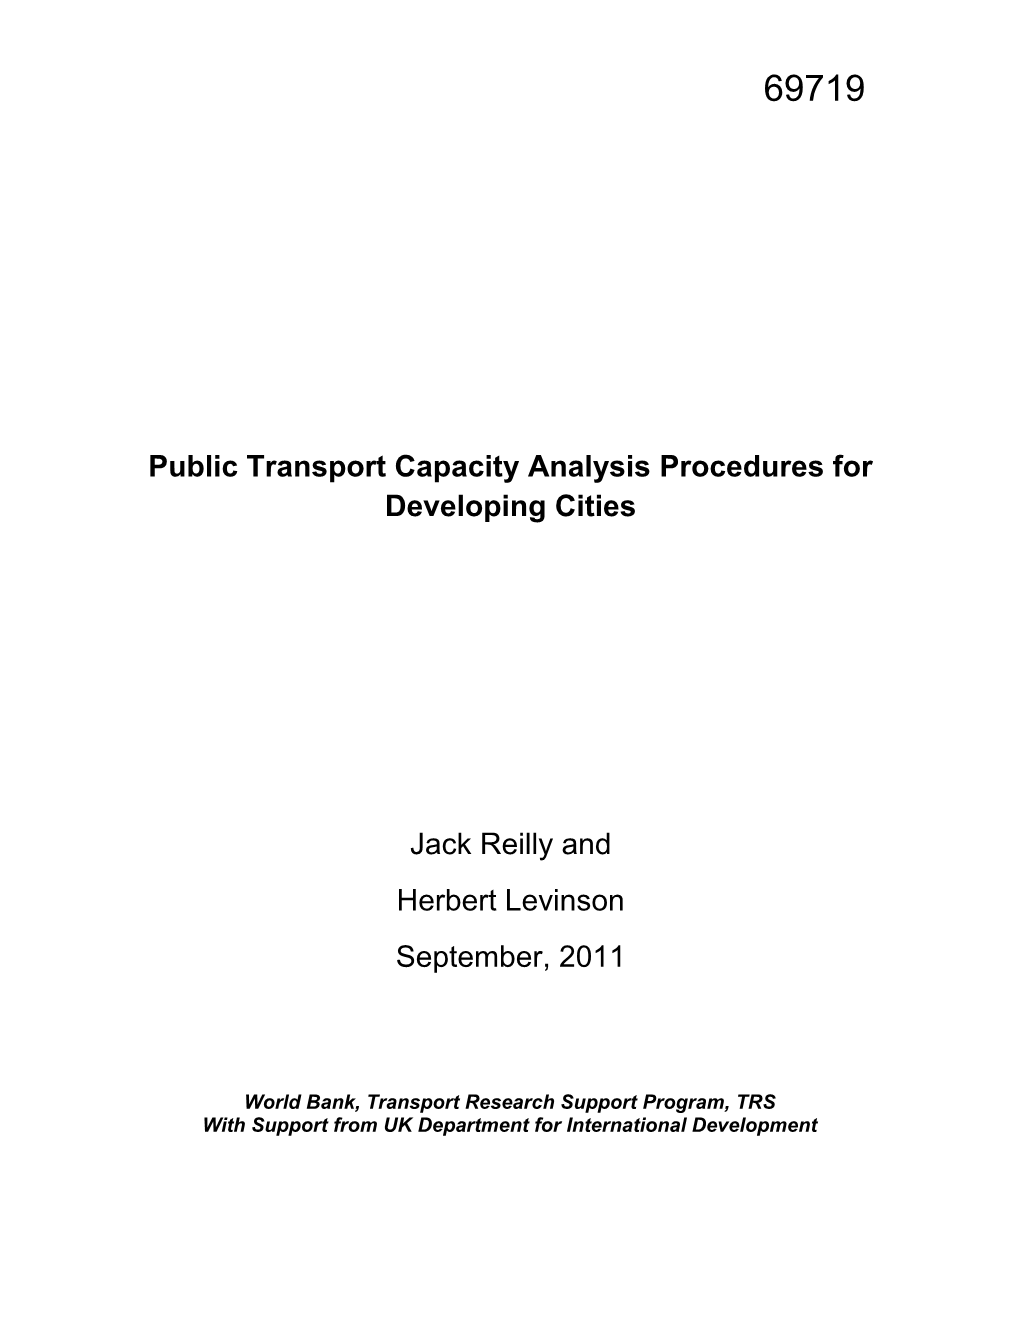 Public Transport Capacity Analysis Procedures for Developing Cities